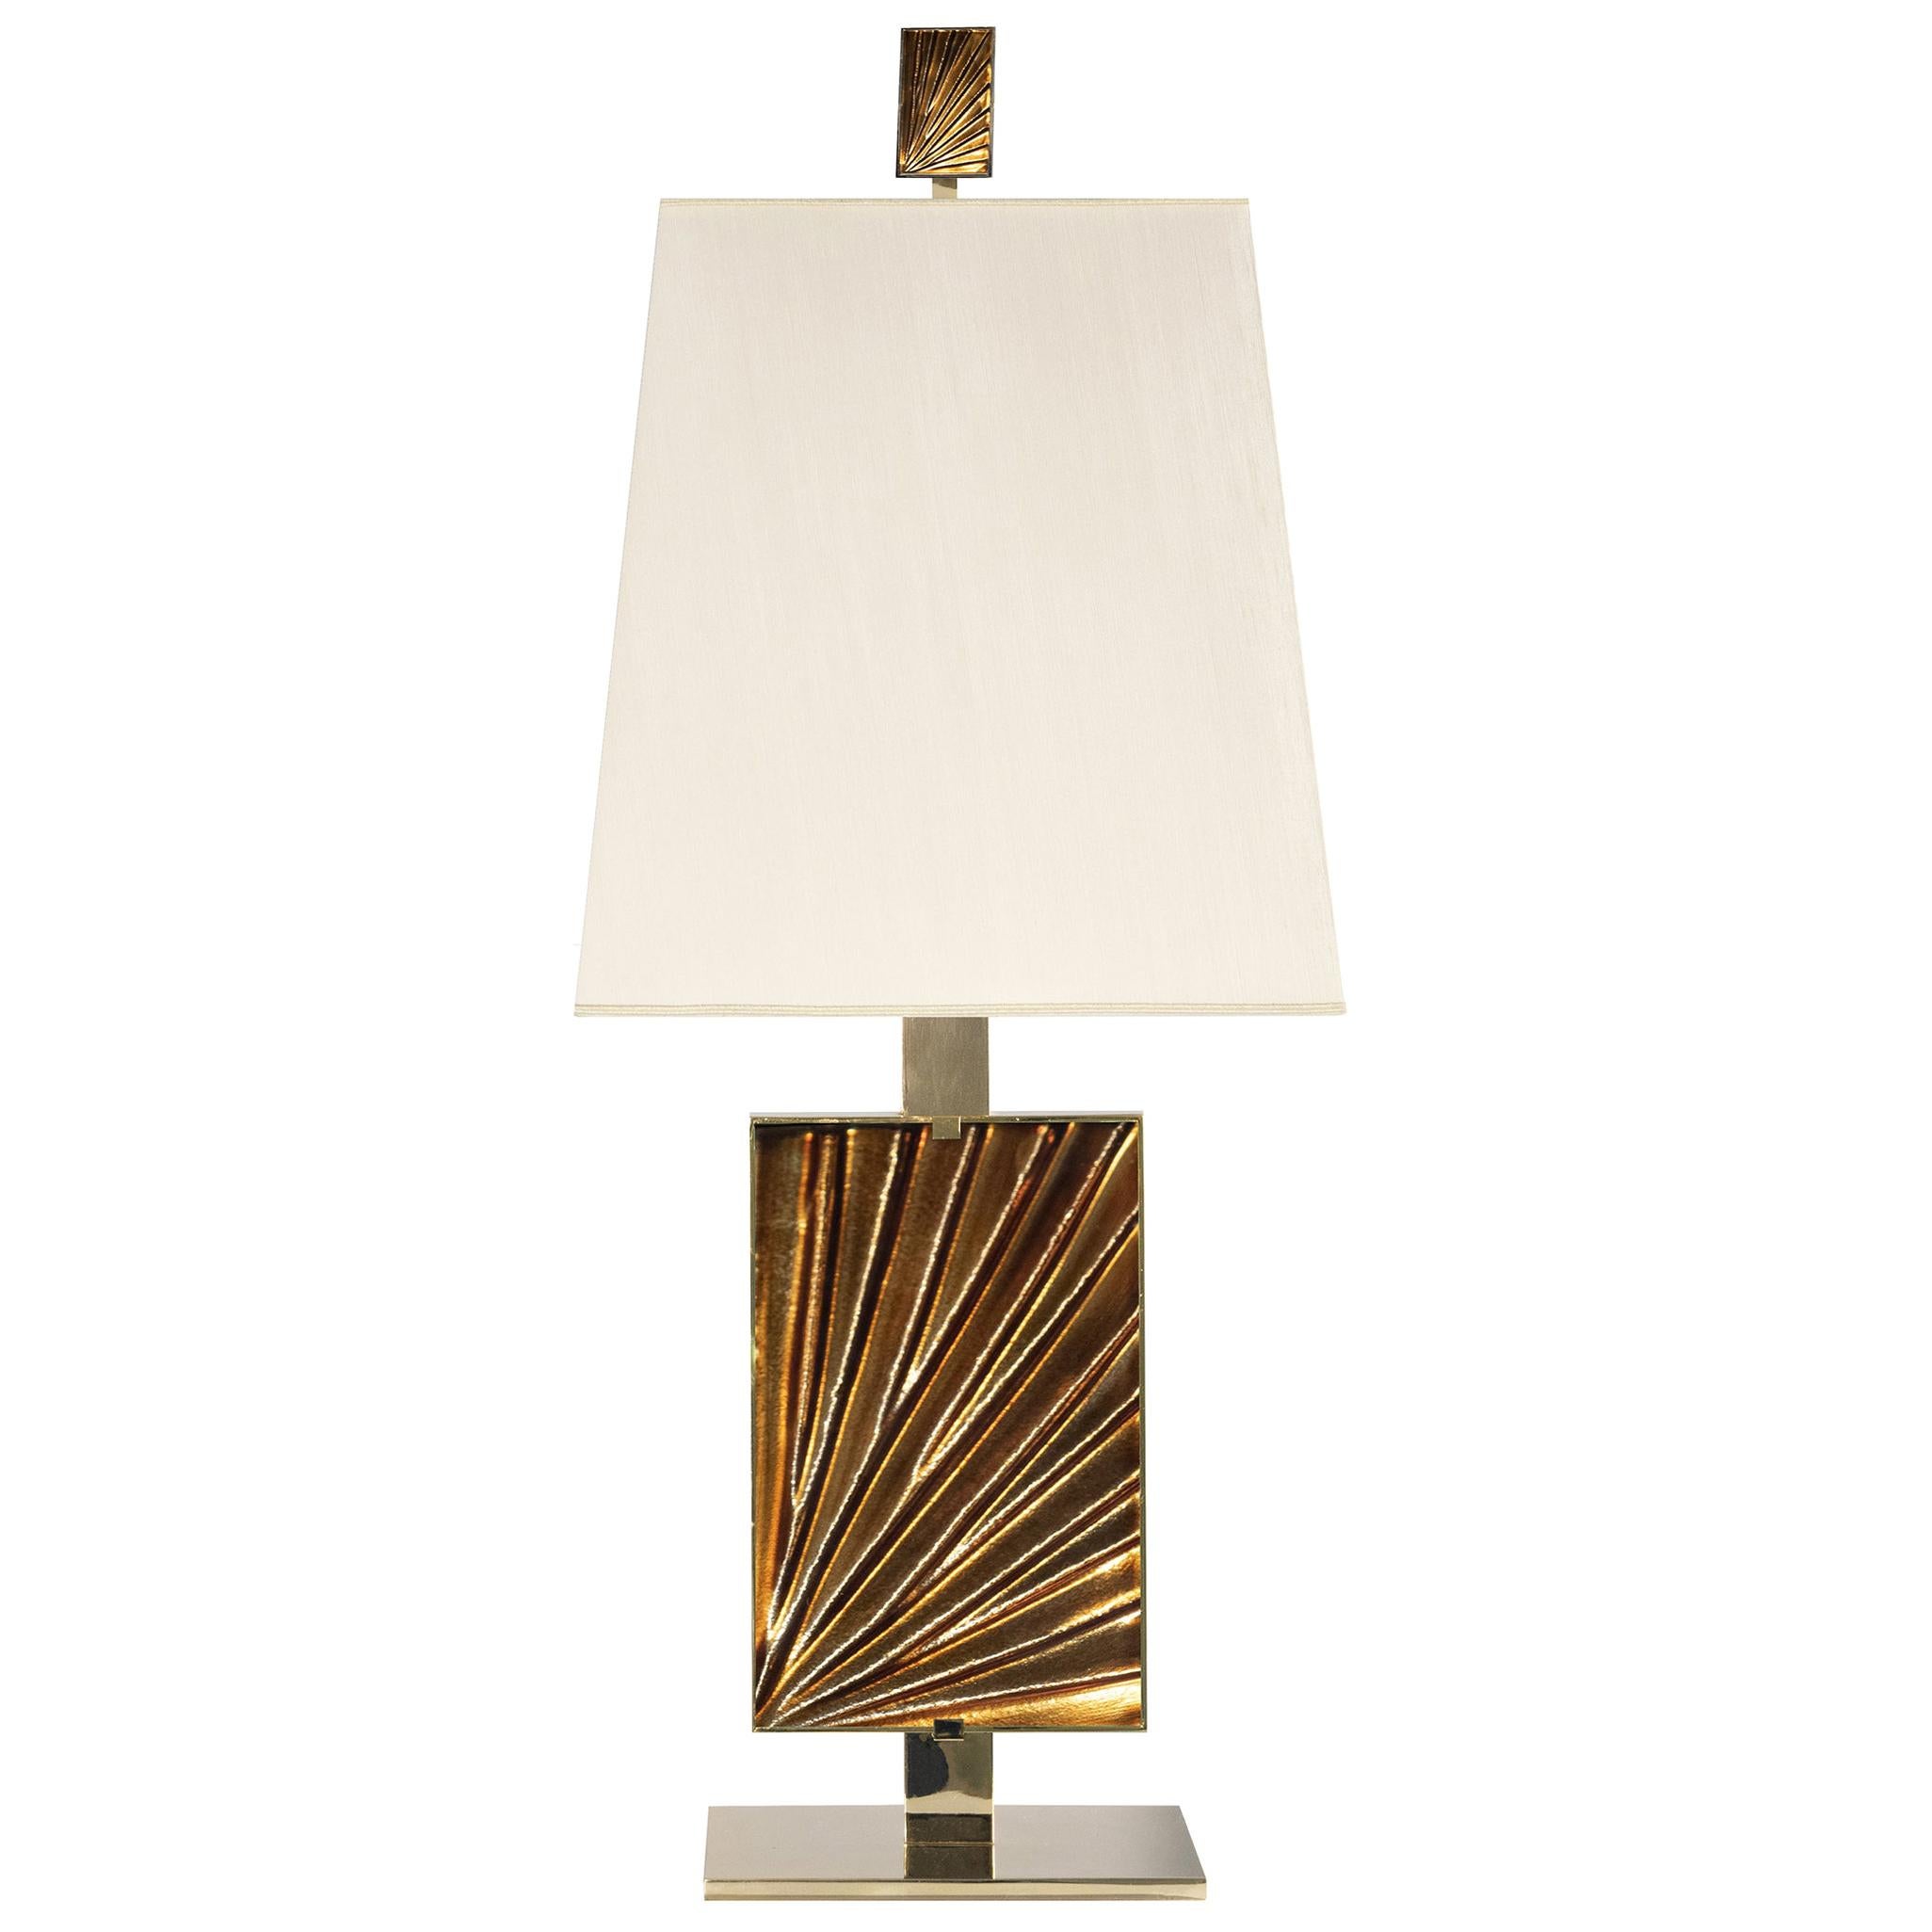 Contemporary 'Ambra' Table Lamp Amber Crystal, Brass and Gold by Ghirò Studio For Sale